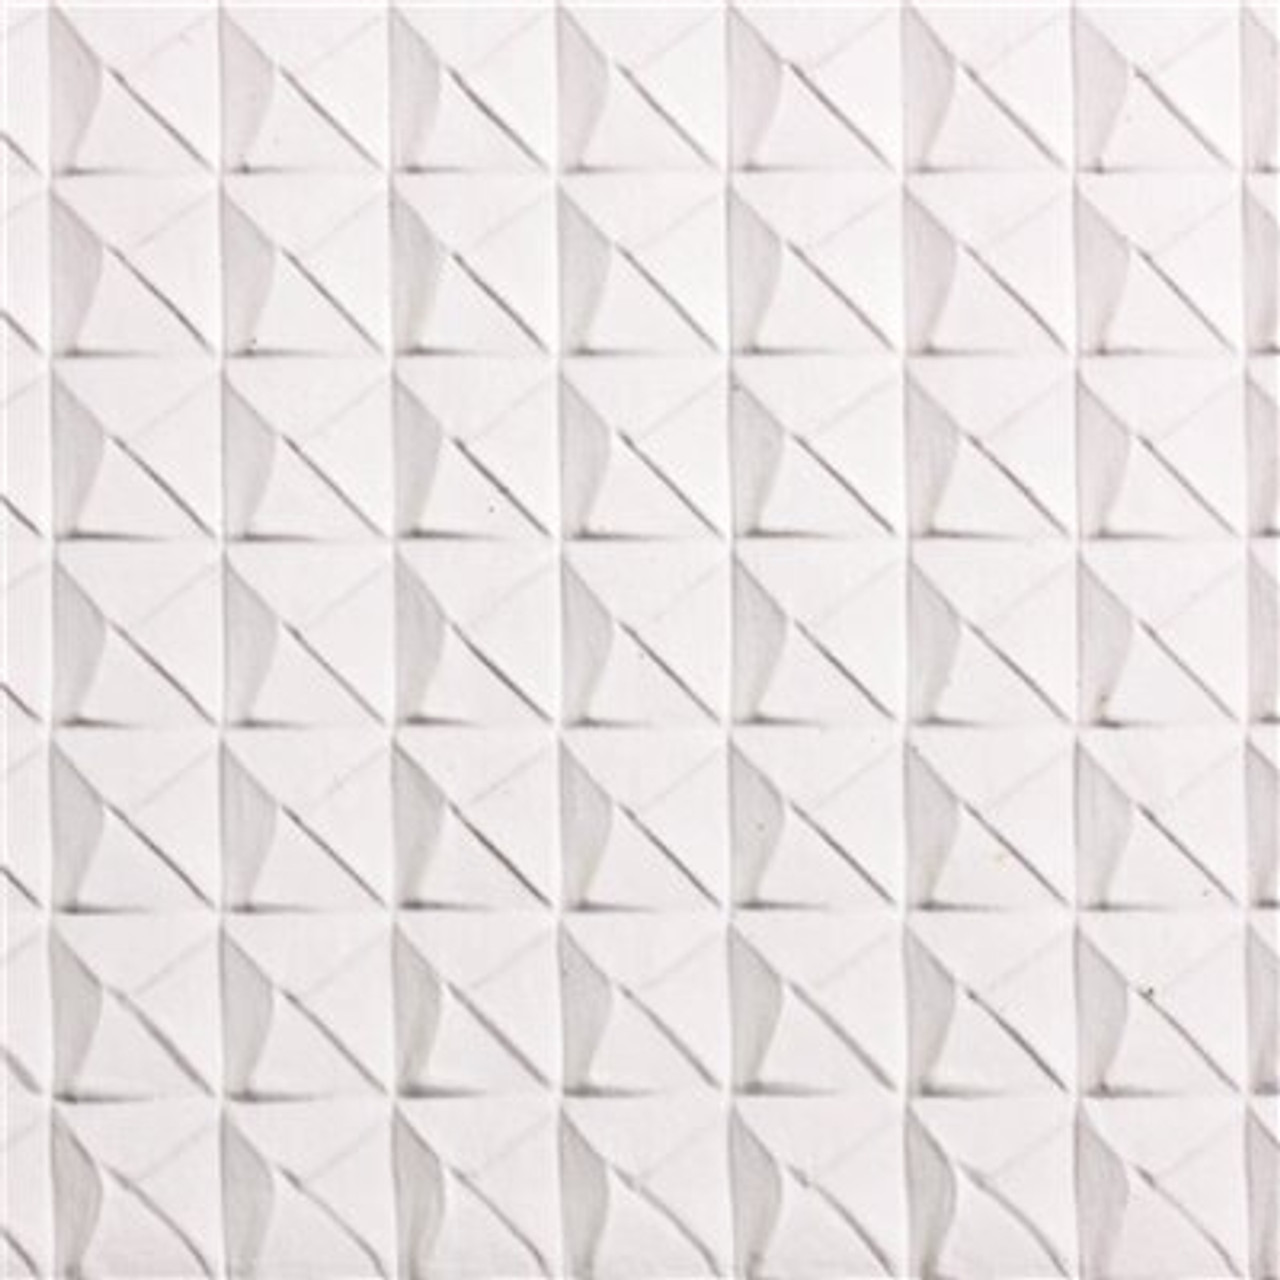 SpectraTile 2 ft. x 2 ft. White Suspended-Grid Waterproof Ceiling Tile (Pack of 12)